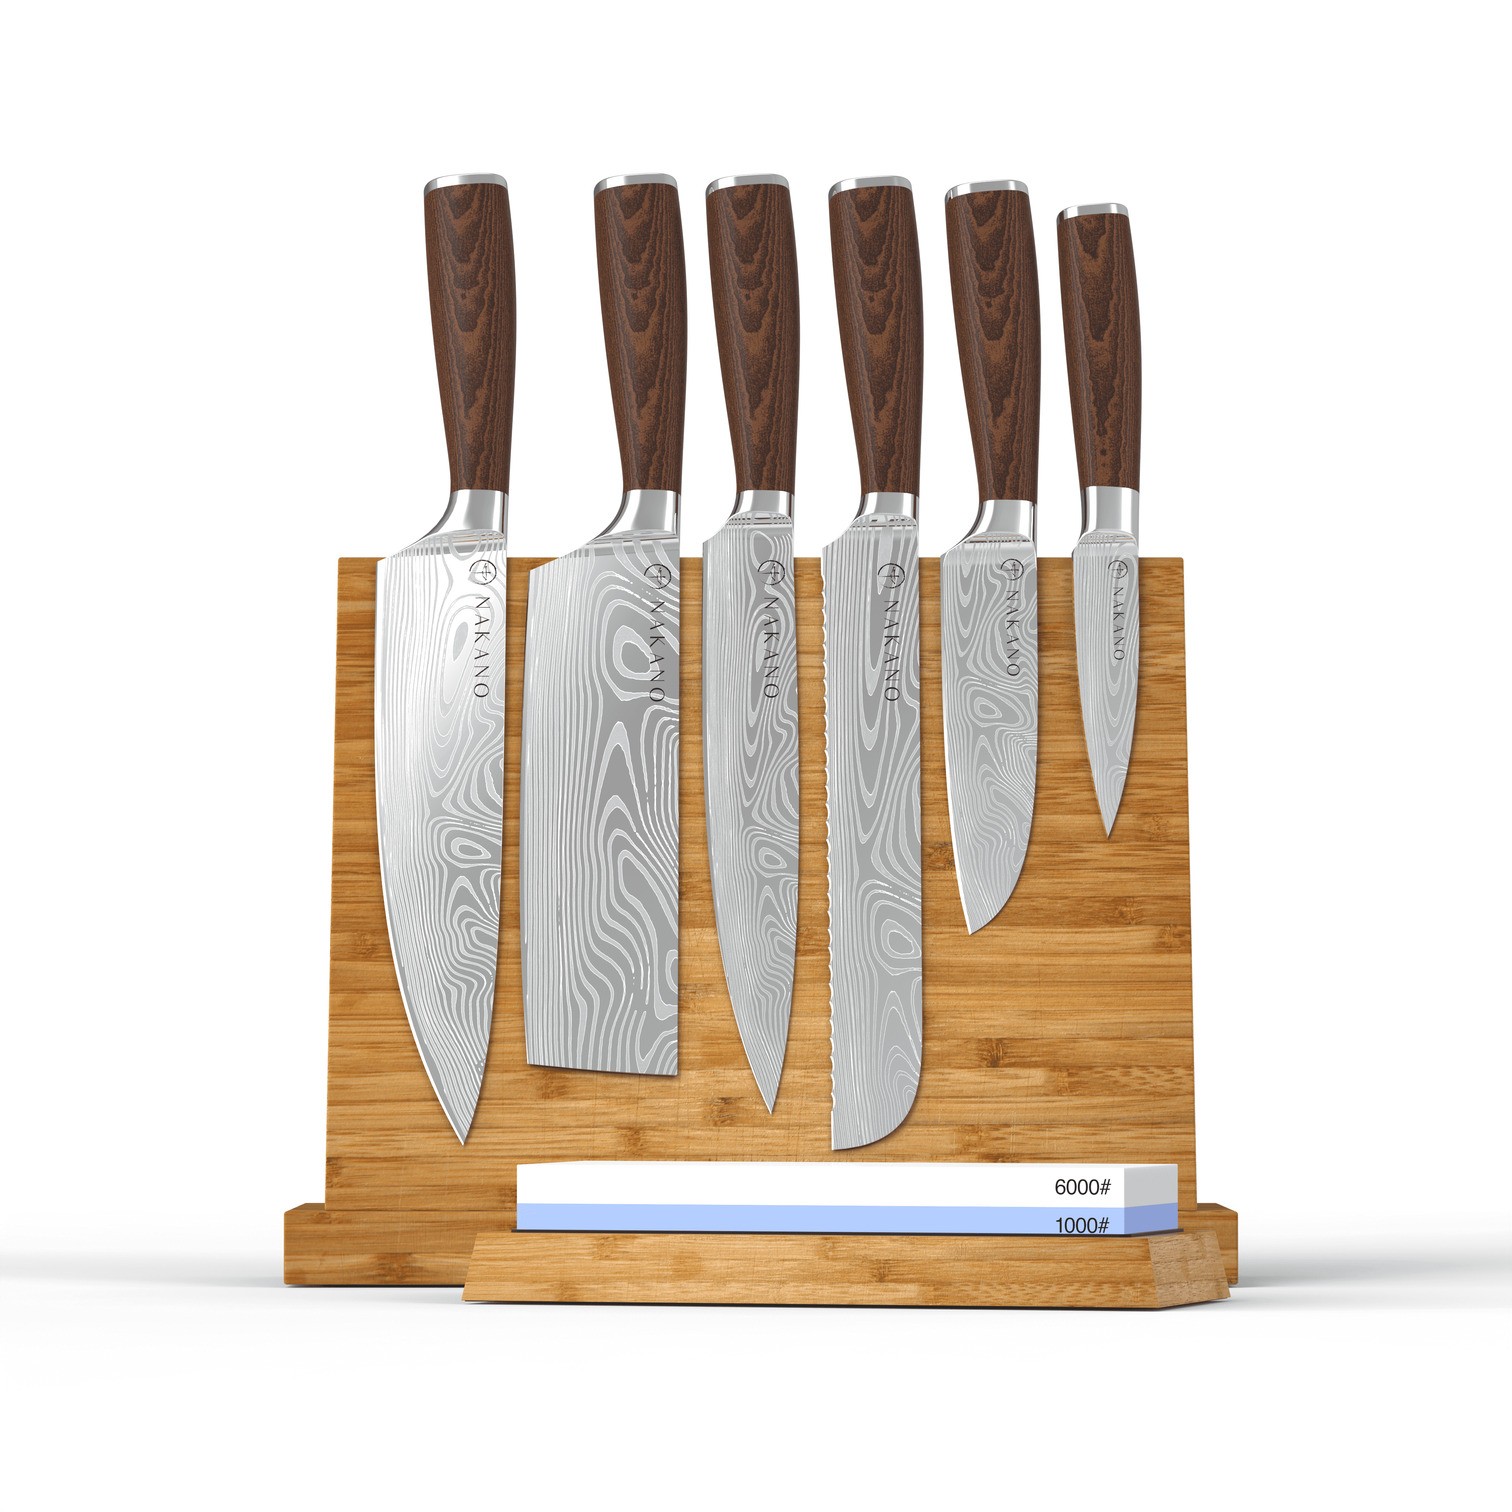 The Best Knives For The Home Cook! This is the best knives you can buy online and are perfect for the home cook! www.ChopHappy.com #bestknives #cookingtips